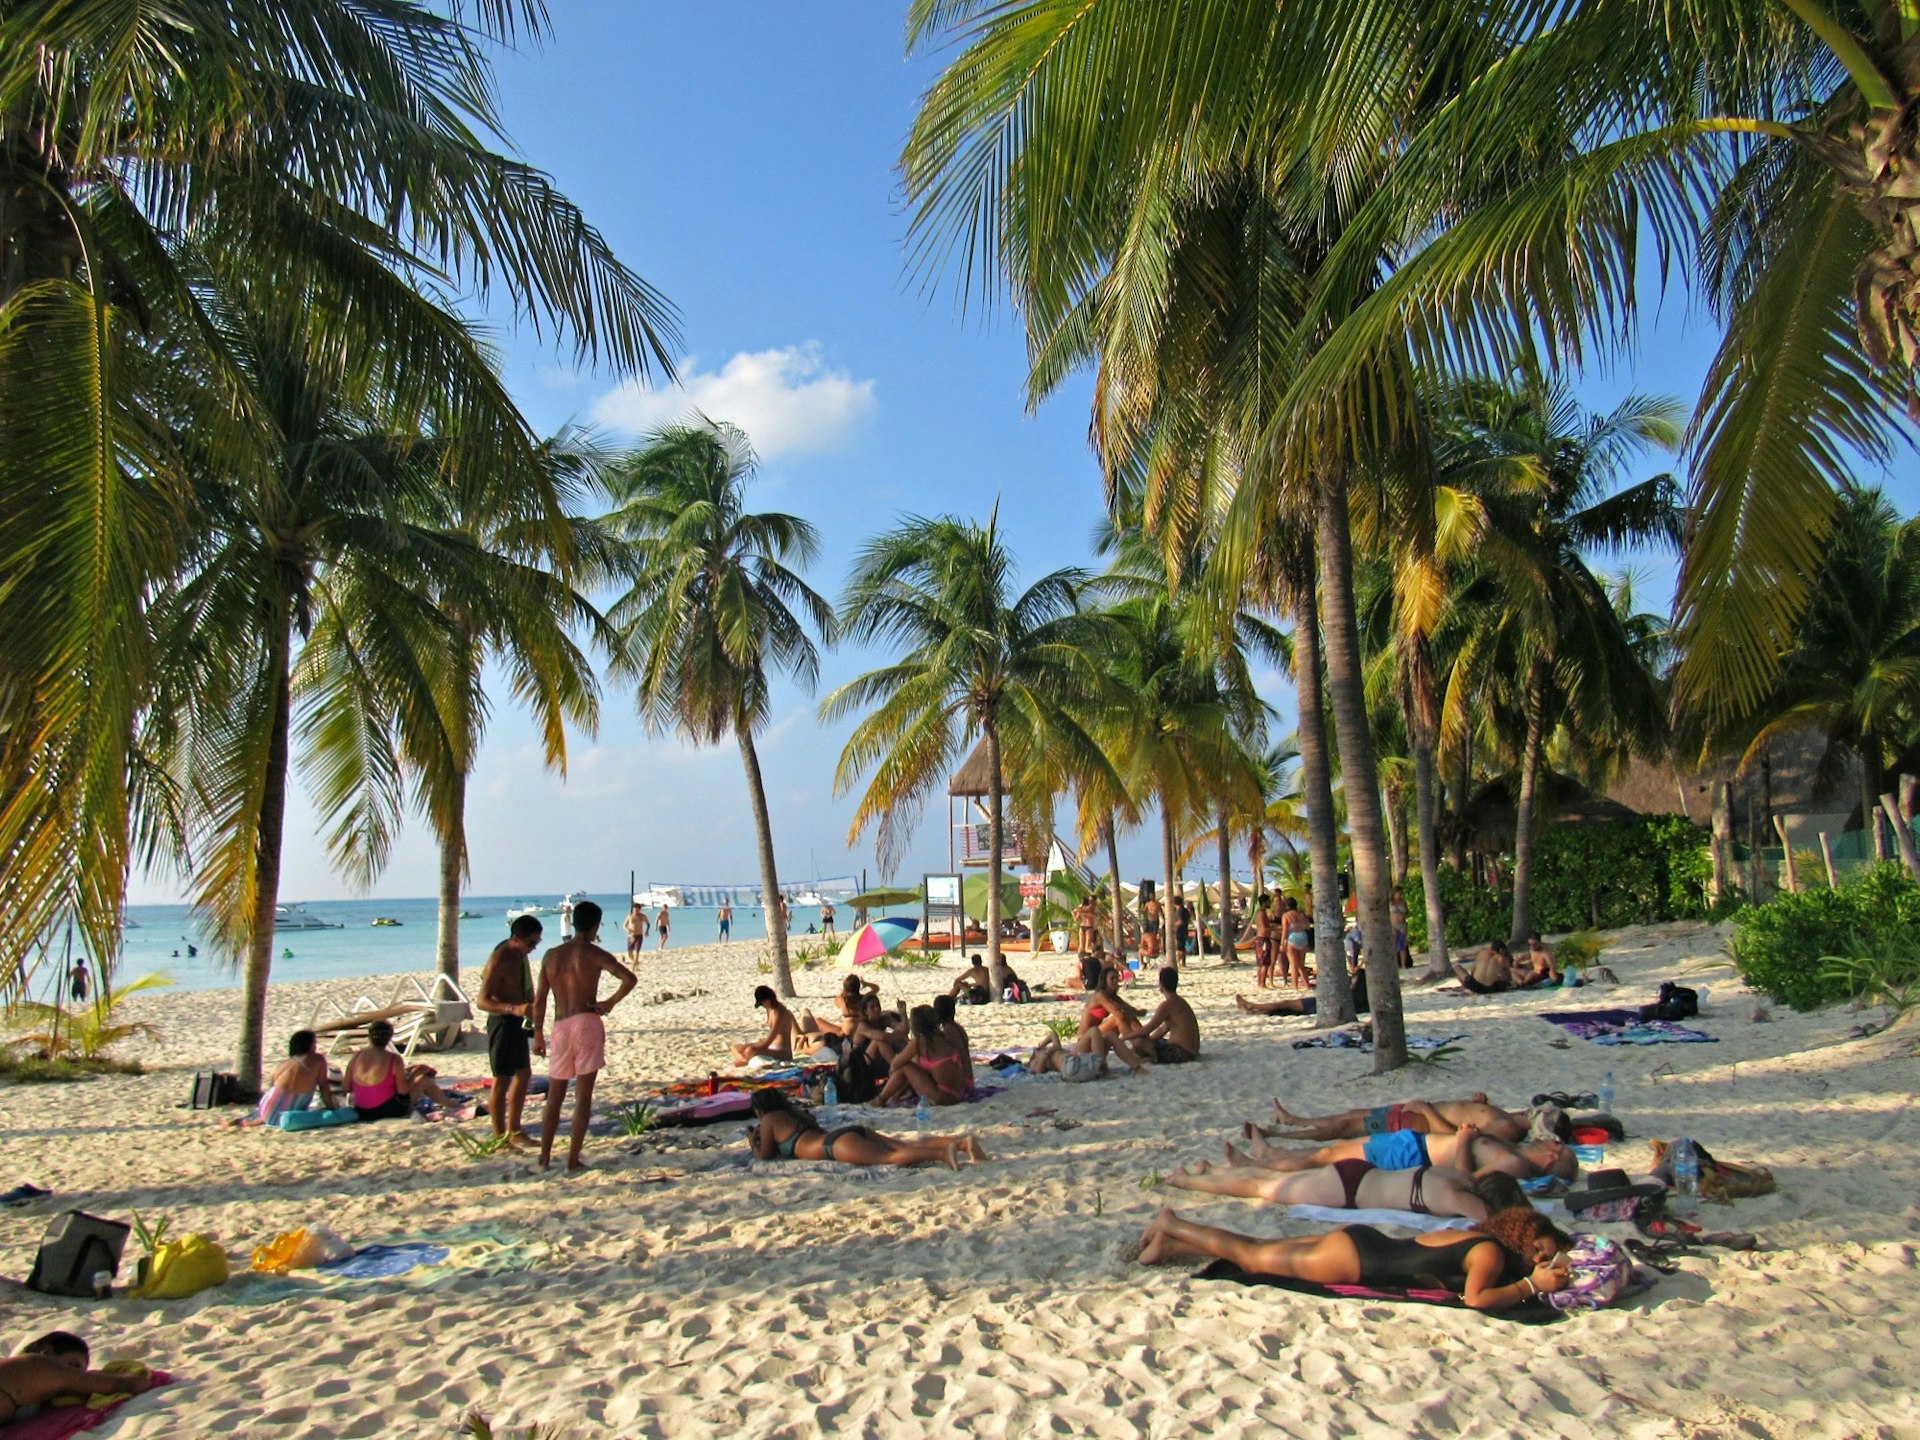 People relax under palm tree on the white sand beaches © Laura Winfree / Lonely Planet